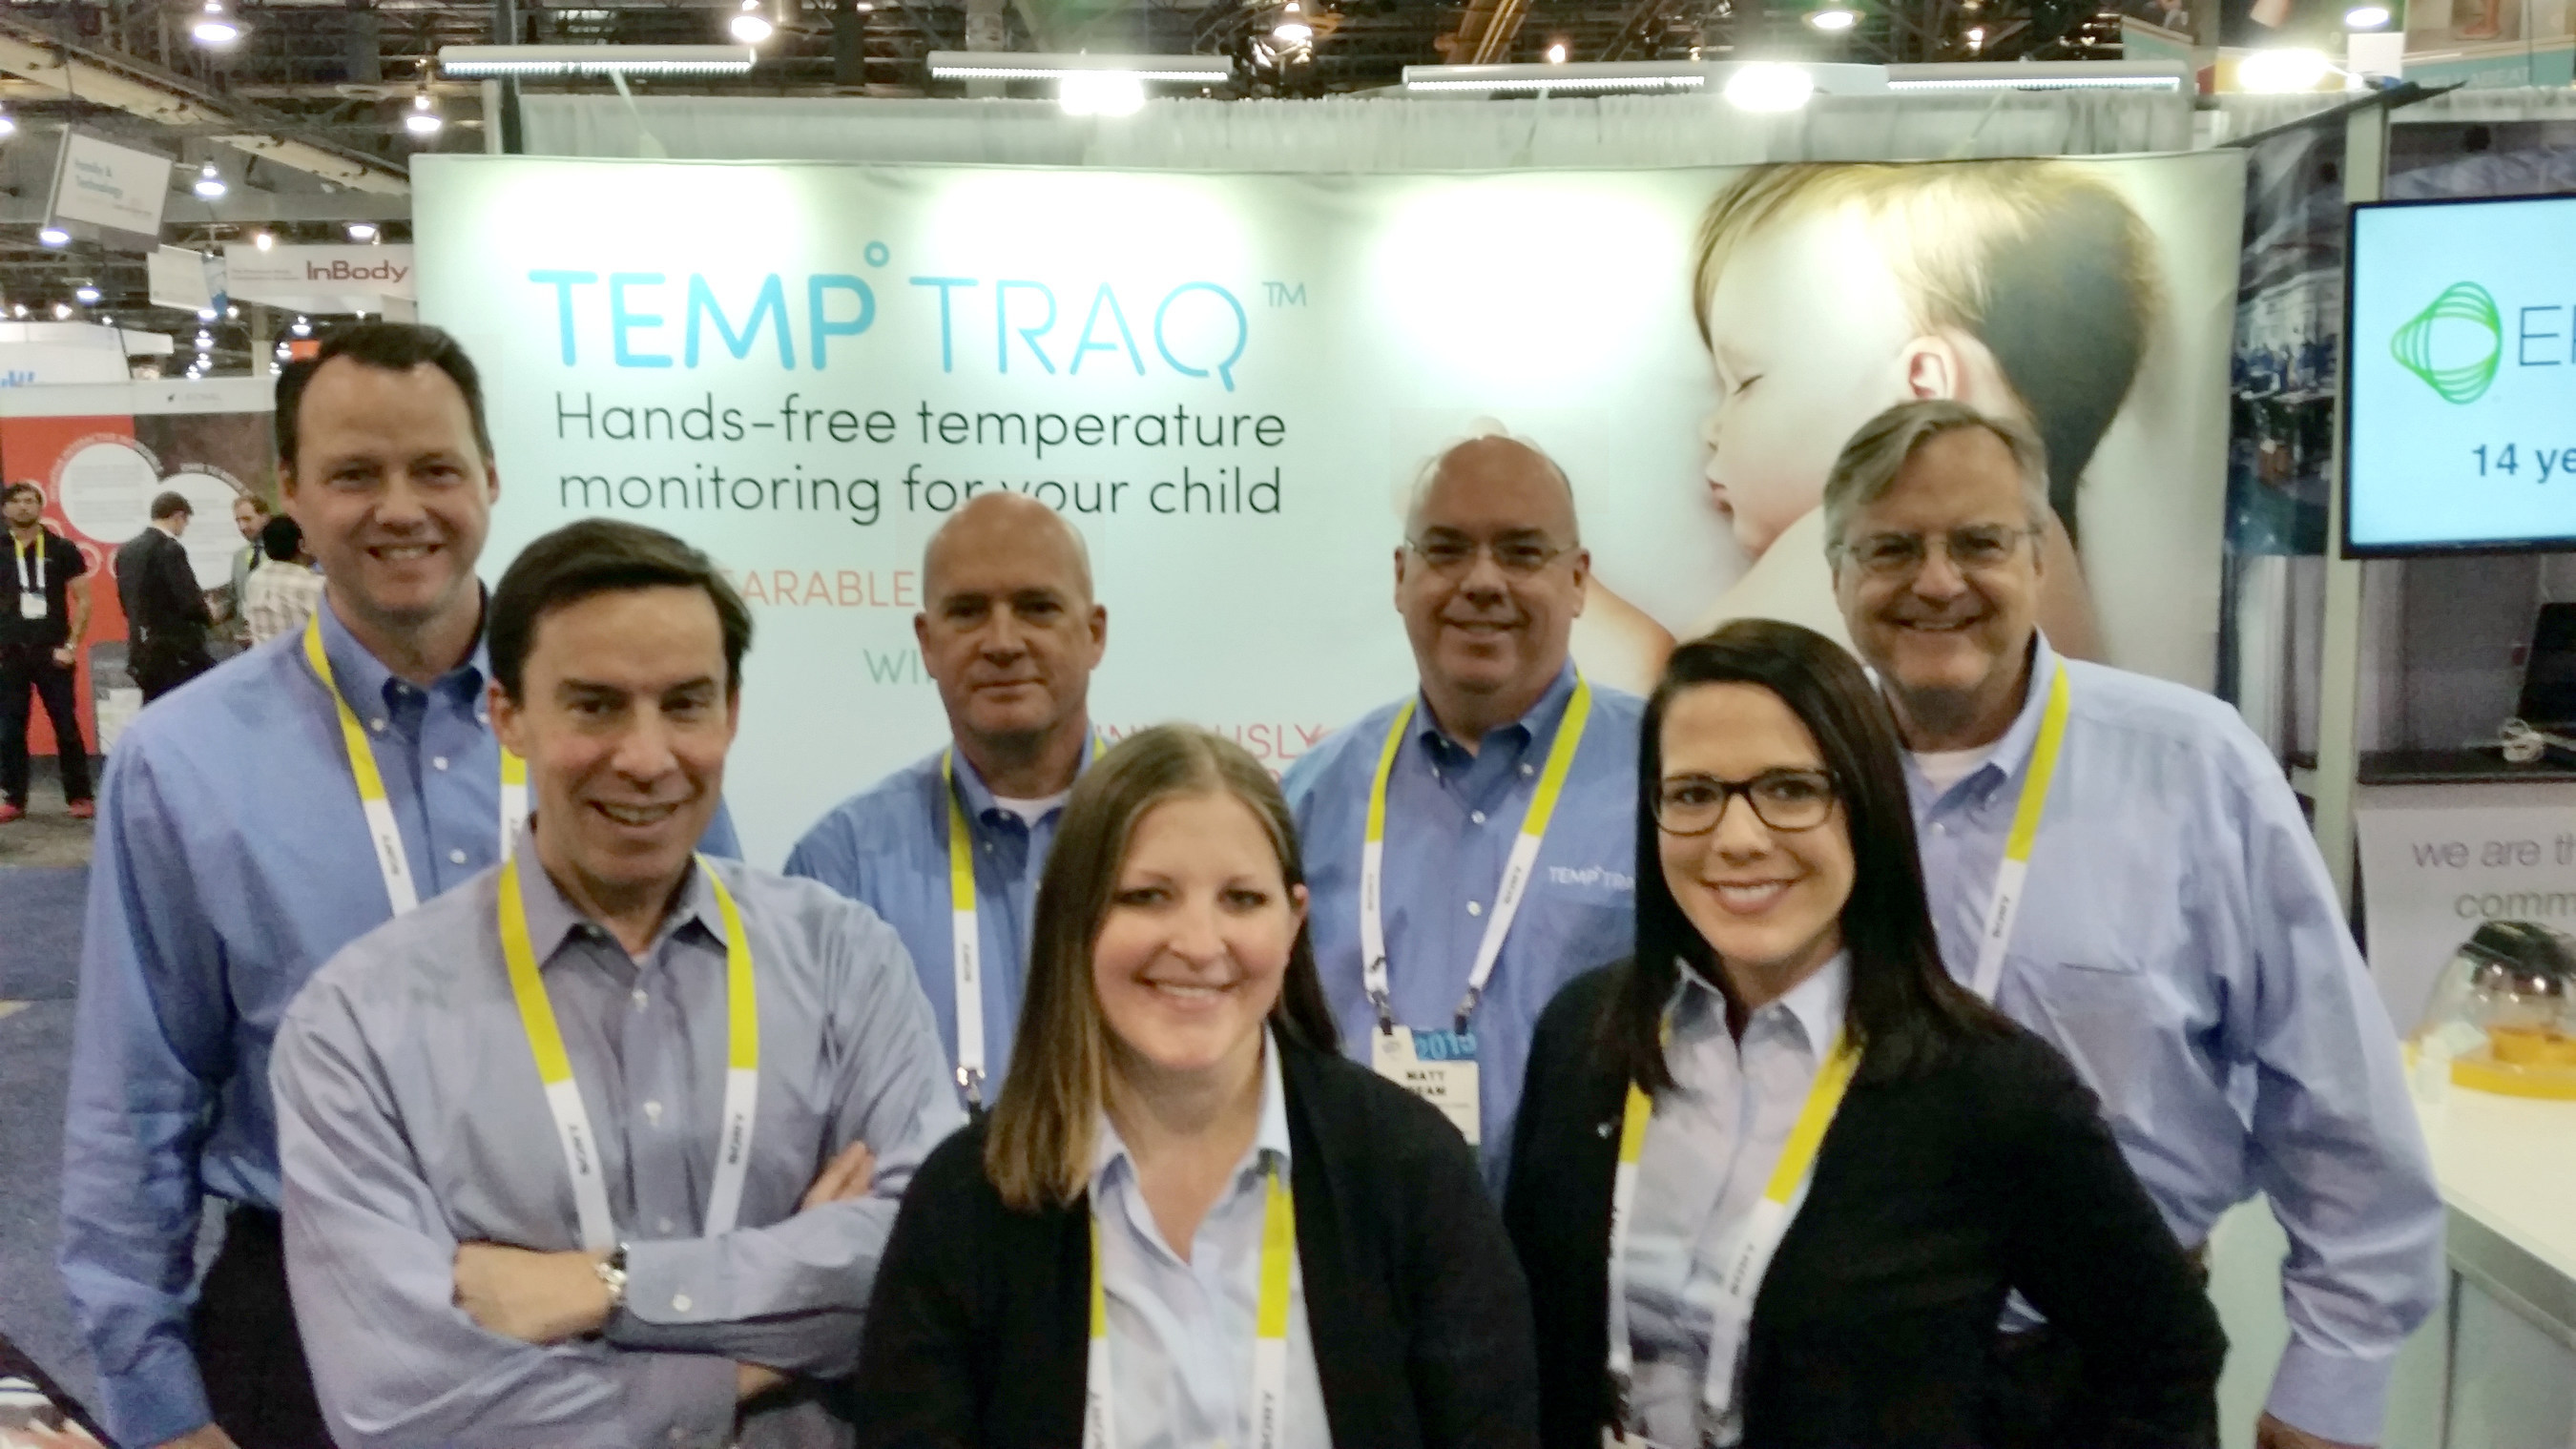 TempTraq(TM), powered by Blue Spark Technologies, made its debut at this year's Consumer Electronics Show in Las Vegas, generating excitement in the tech and parenting communities.